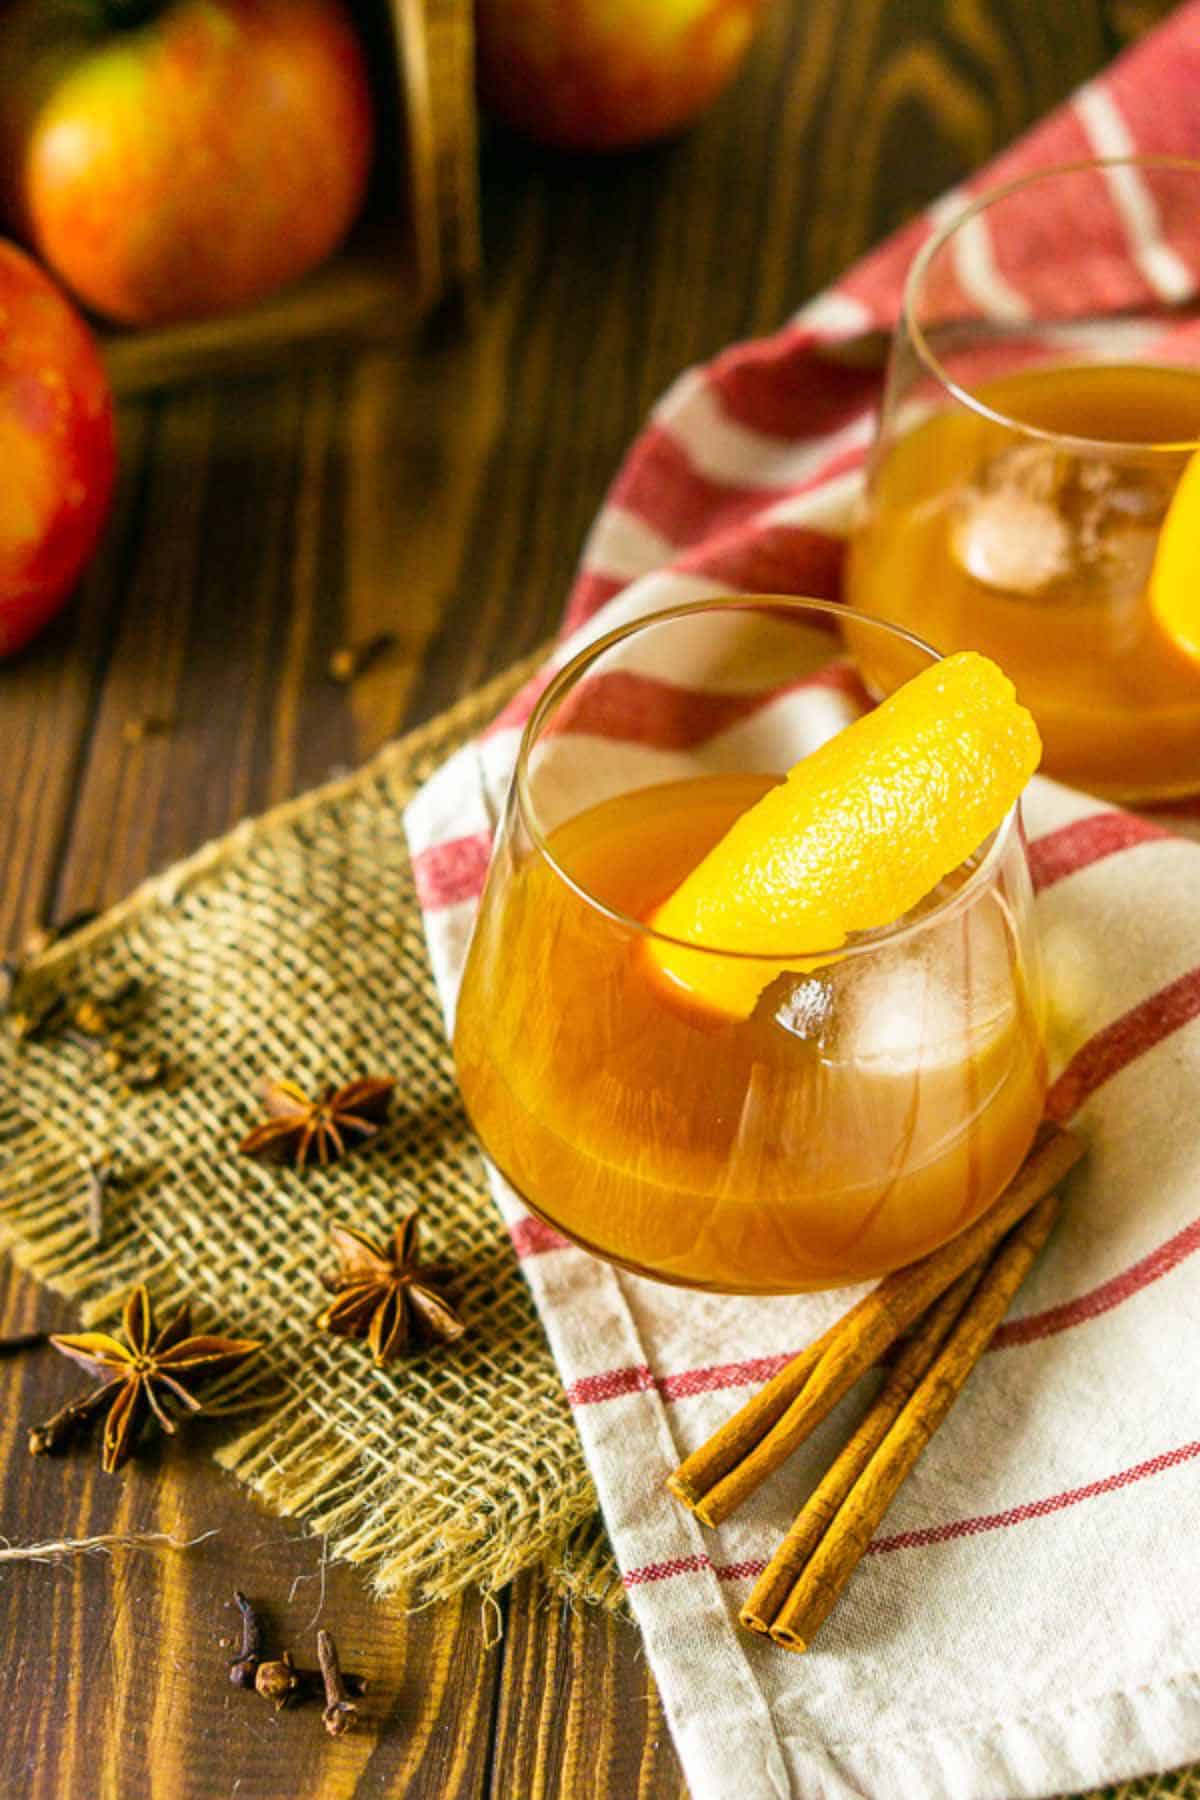 Looking down on an apple cider old fashioned on a brown wooden surface with burlap, spices and apples around it.